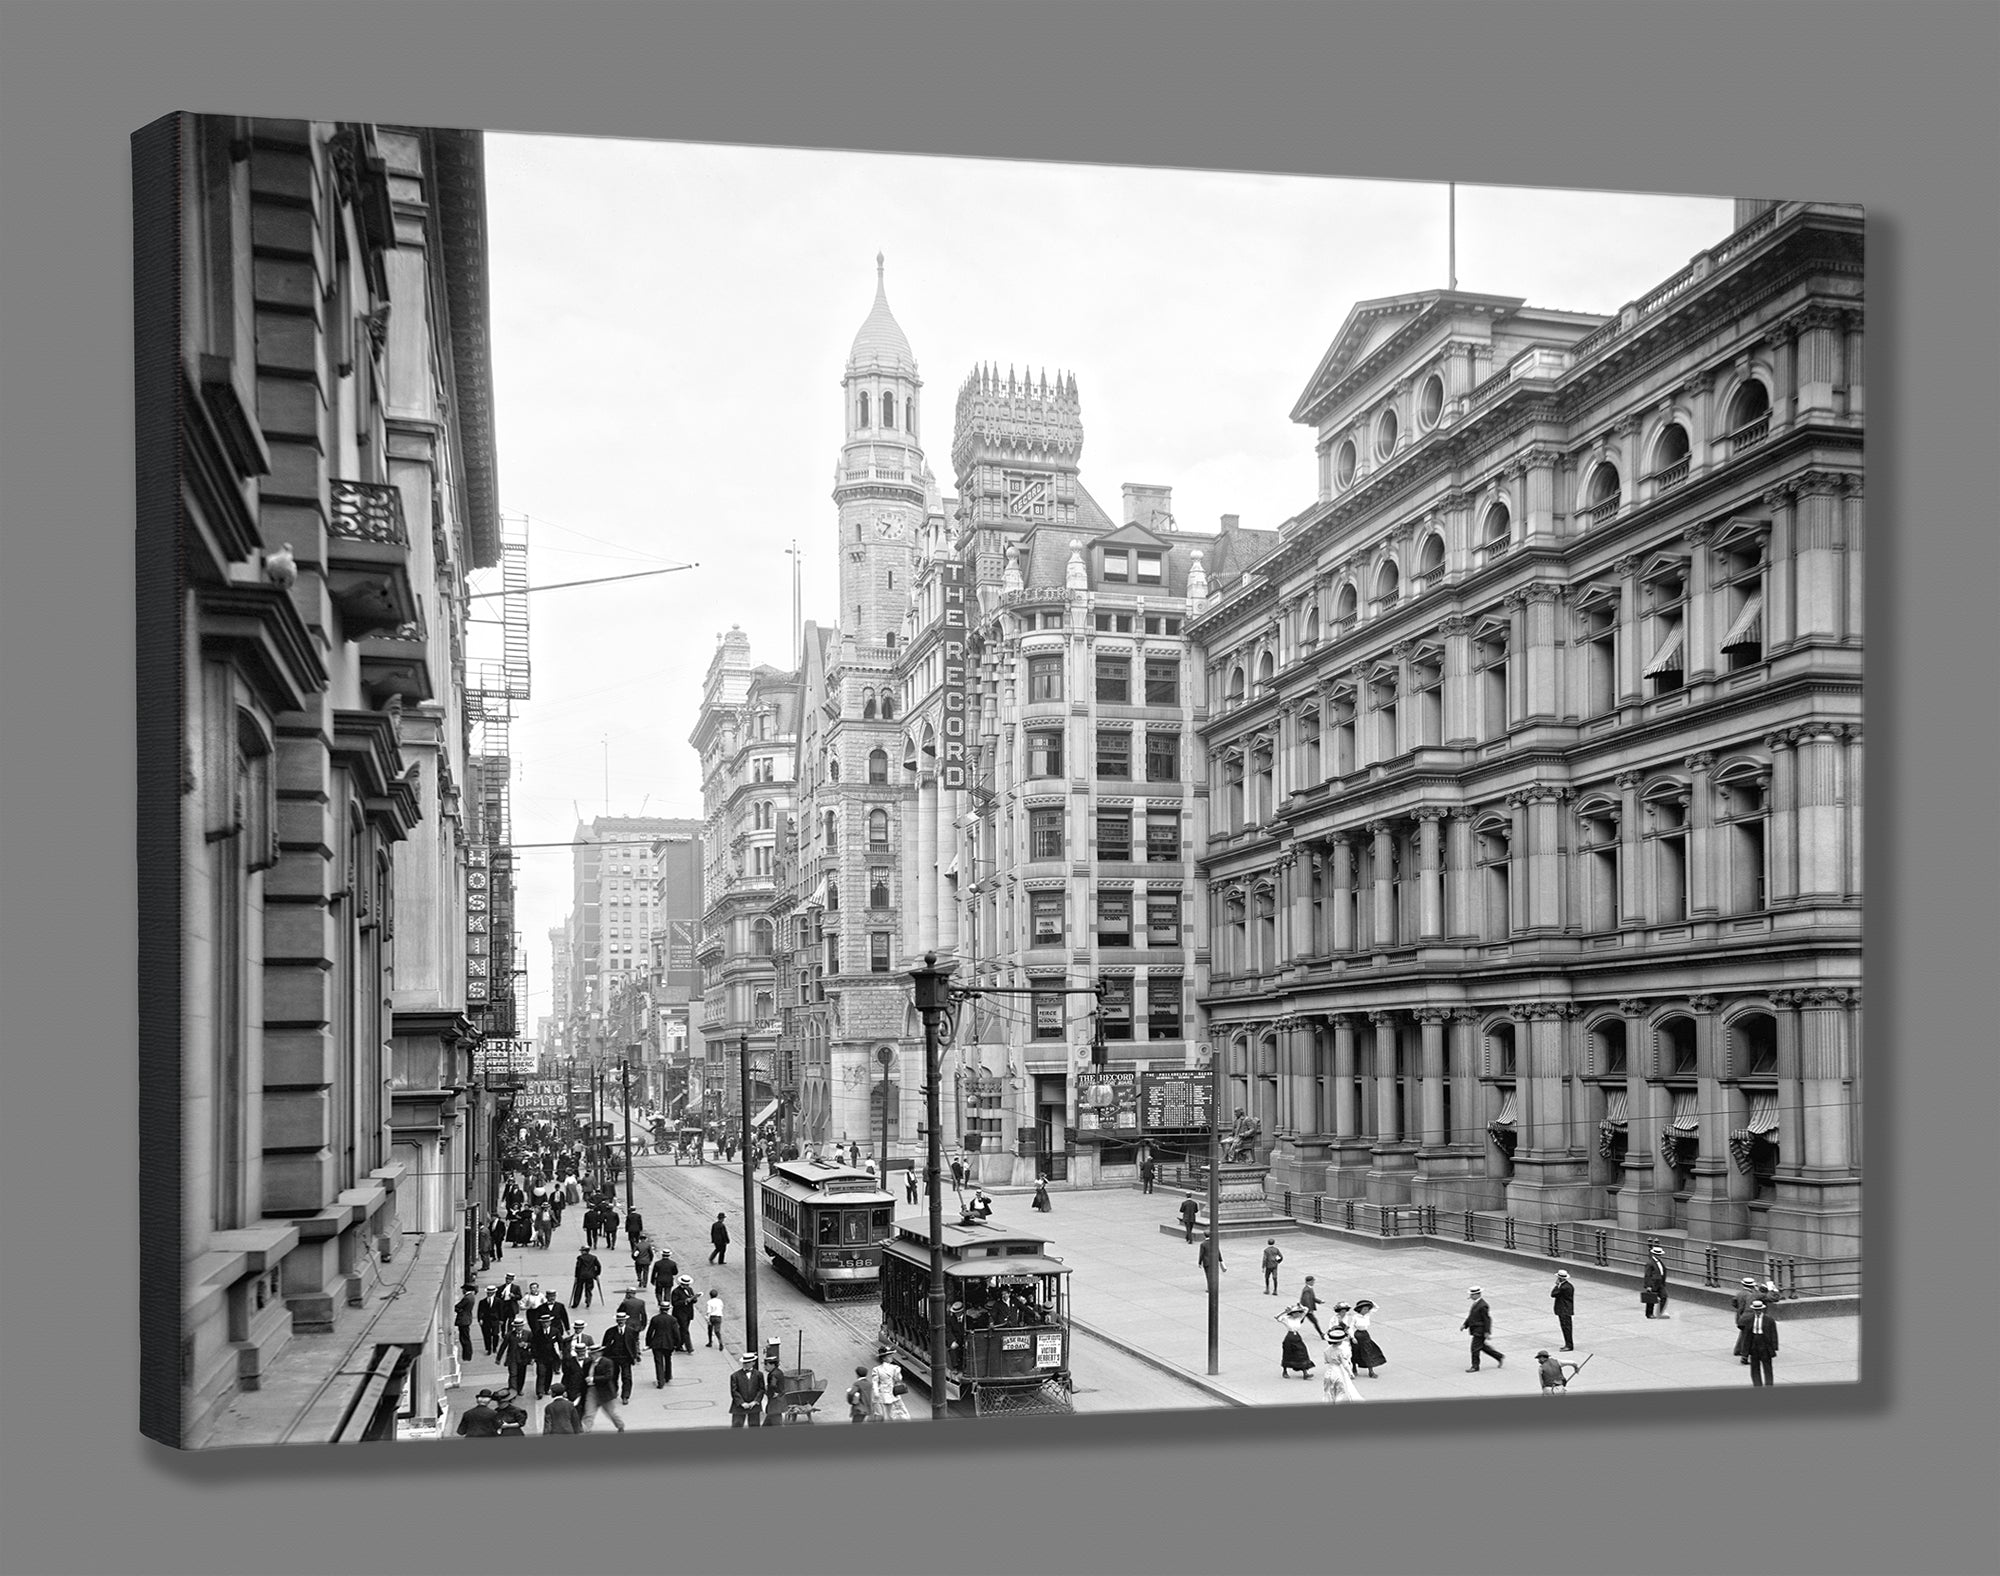 A fine art canvas print of a black and white photogrpah of Chestnut Street in Philadelphia